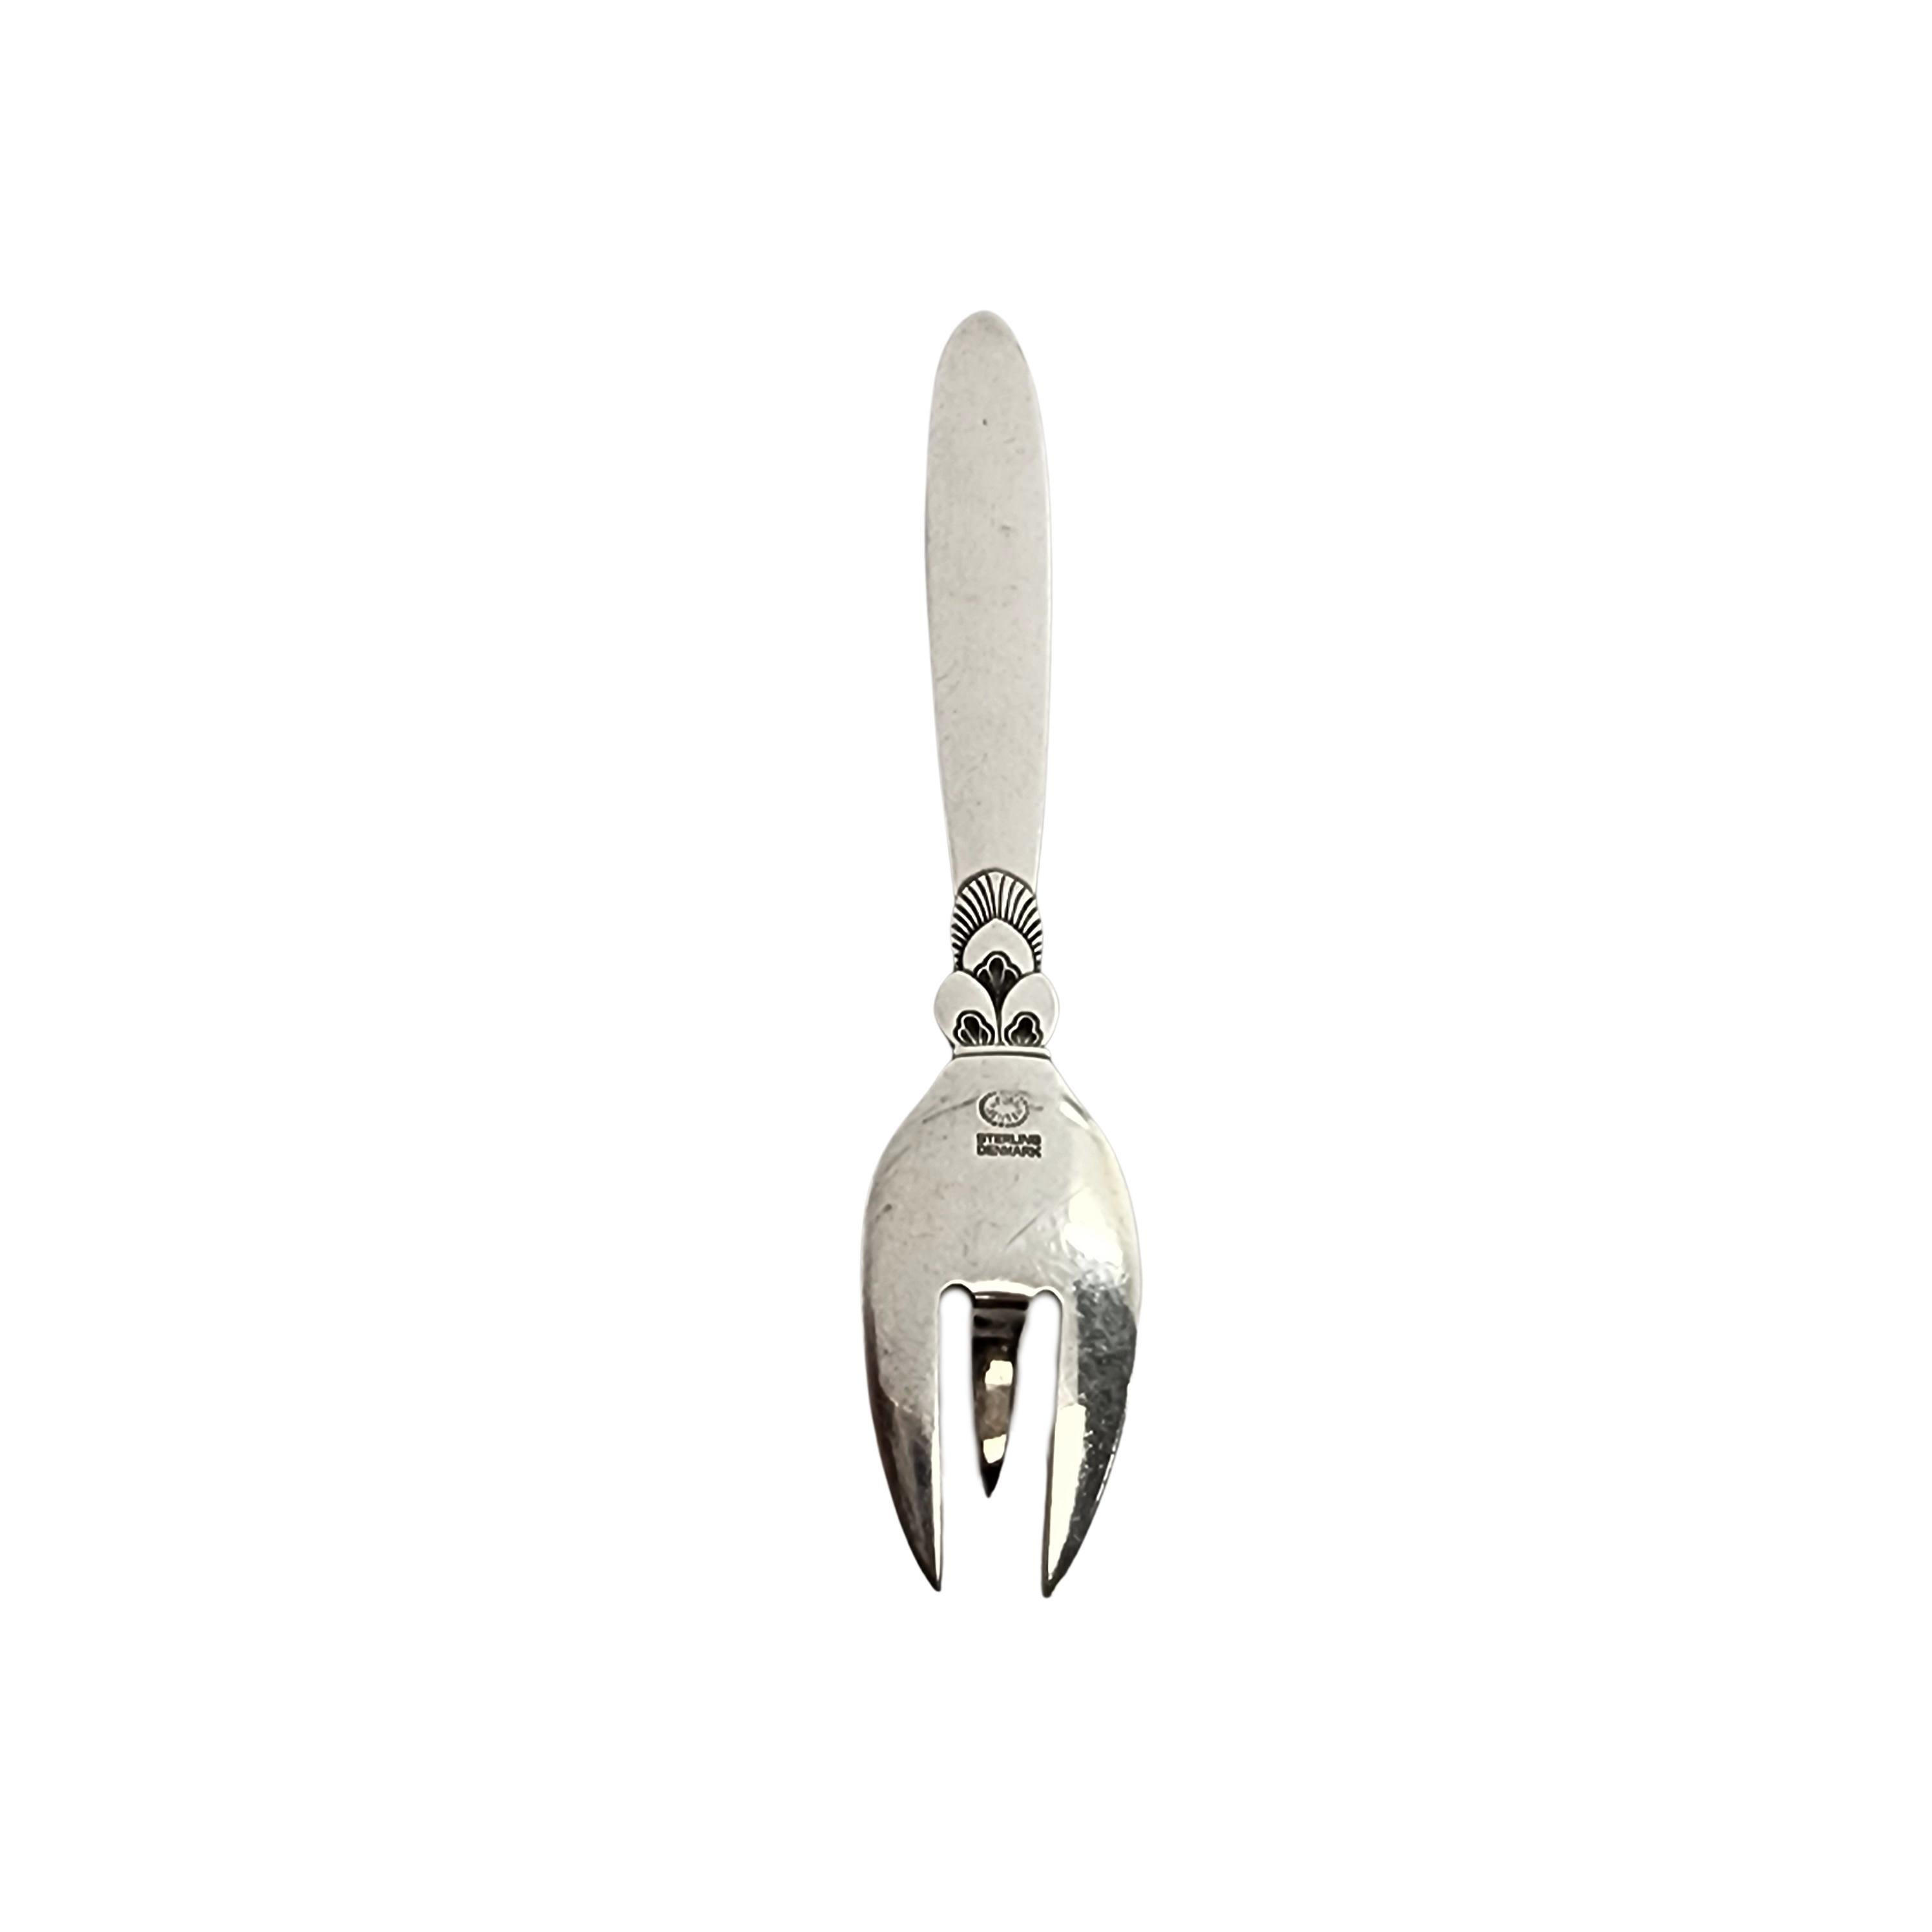 Sterling silver lemon fork by Georg Jensen Denmark in the Cactus pattern.

Created by long-time Jensen designer Gunorph Albertus, the Cactus pattern was introduced in 1930 and features a character-rich Art Deco design. This small fork features a